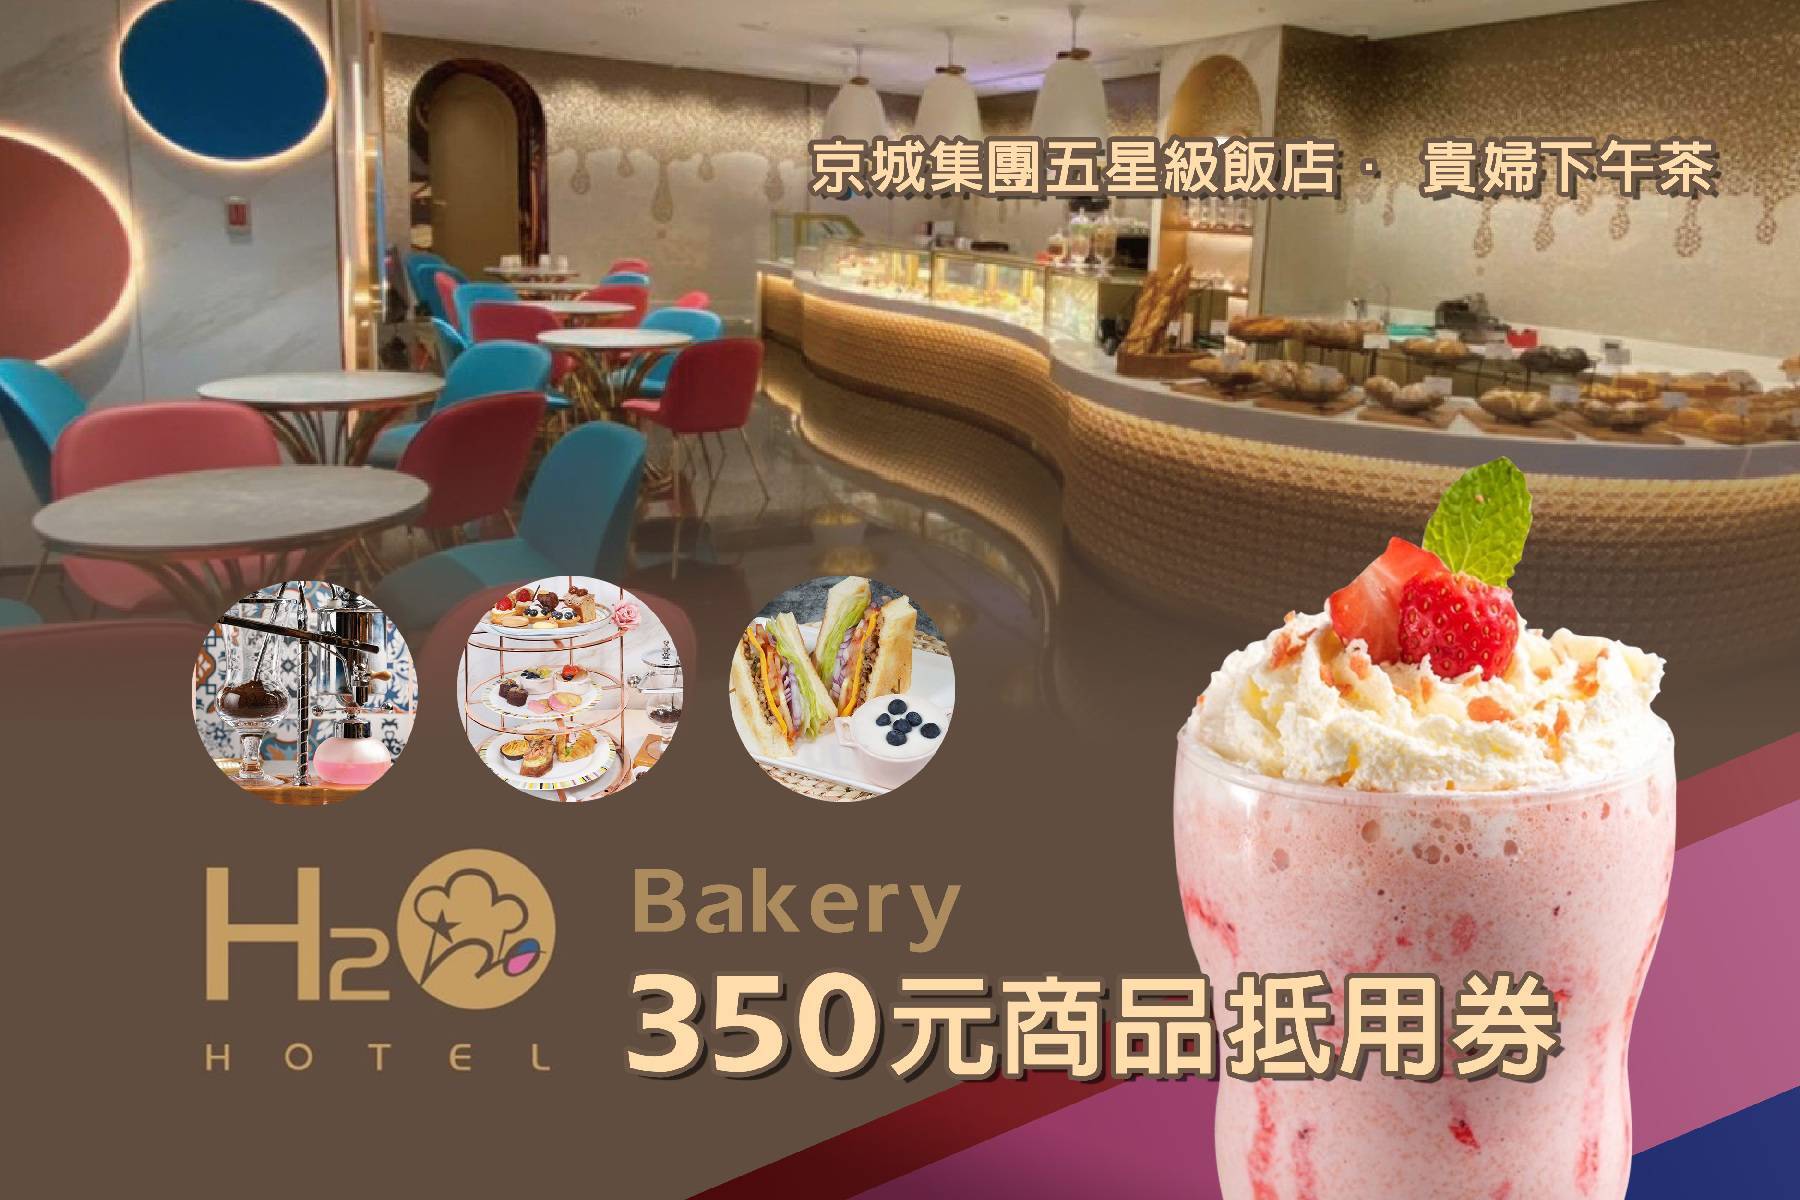 ｜◆H2O Bakery-350元商品抵用券1